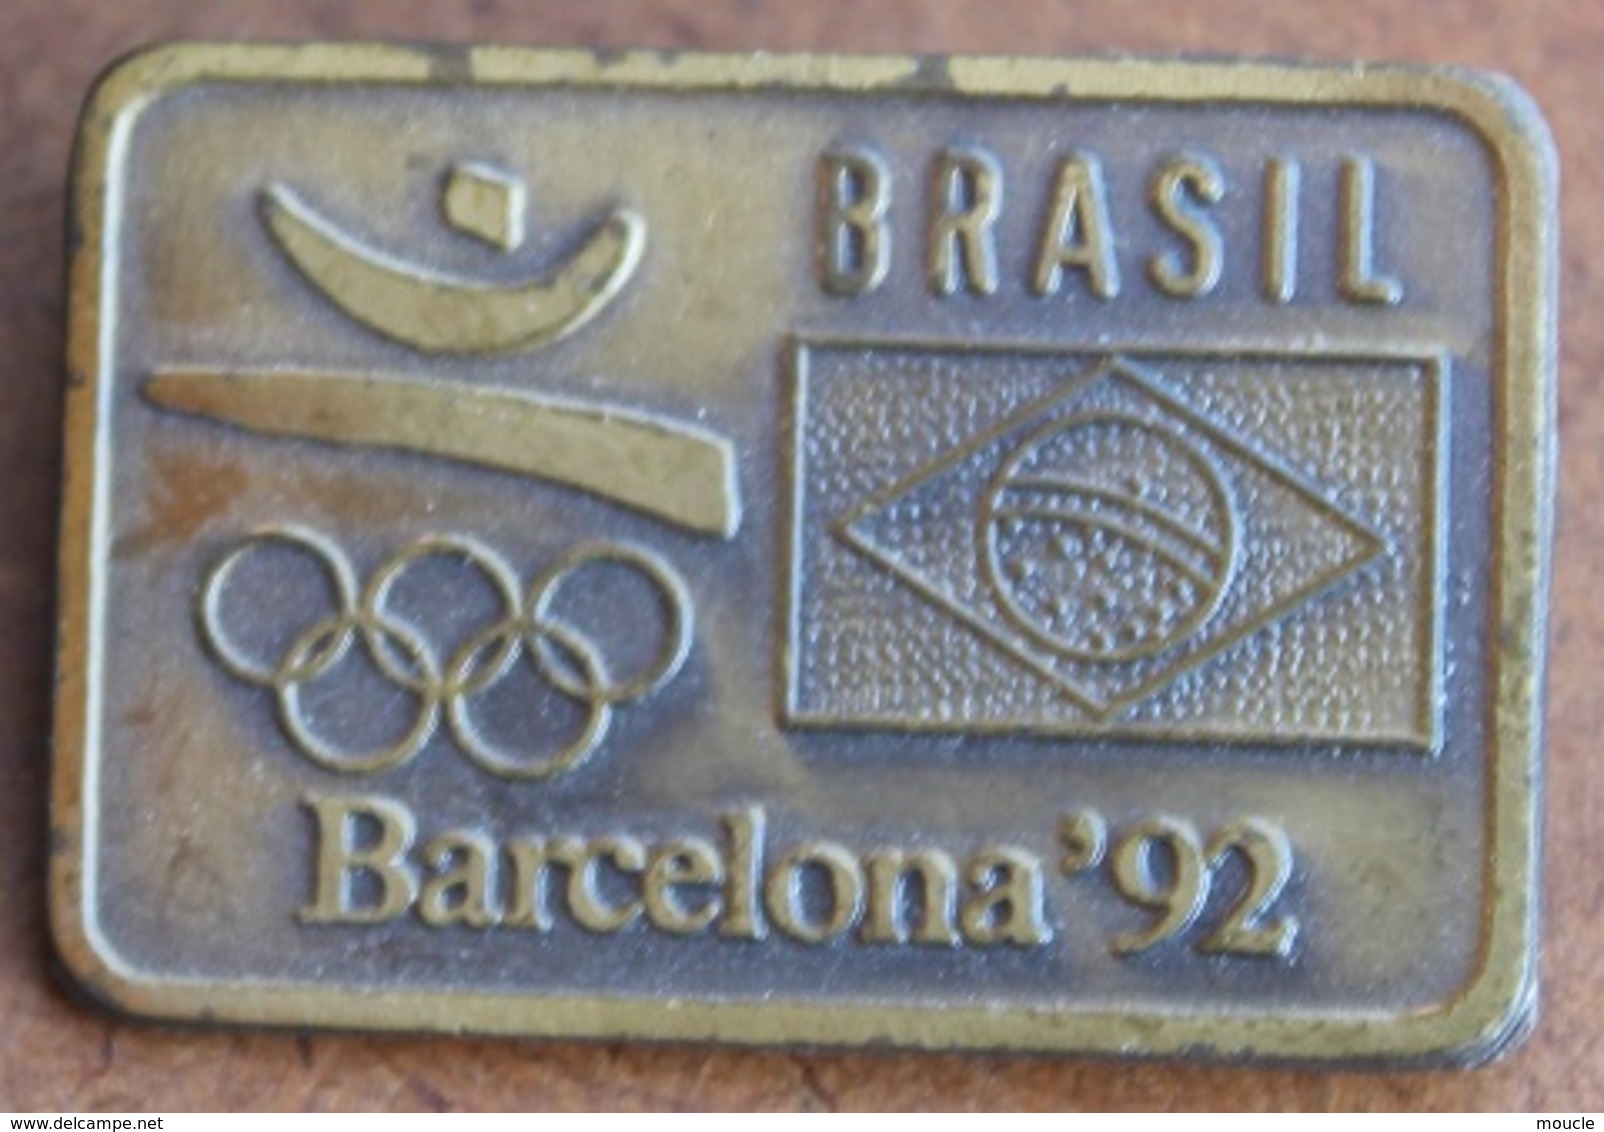 ATTENTION C'EST UNE BROCHE - SPINDEL - BROOCH -  JEUX OLYMPIQUES BARCELONA 92 - BRASIL OLYMPIC TEAM - BRESIL - Olympische Spelen